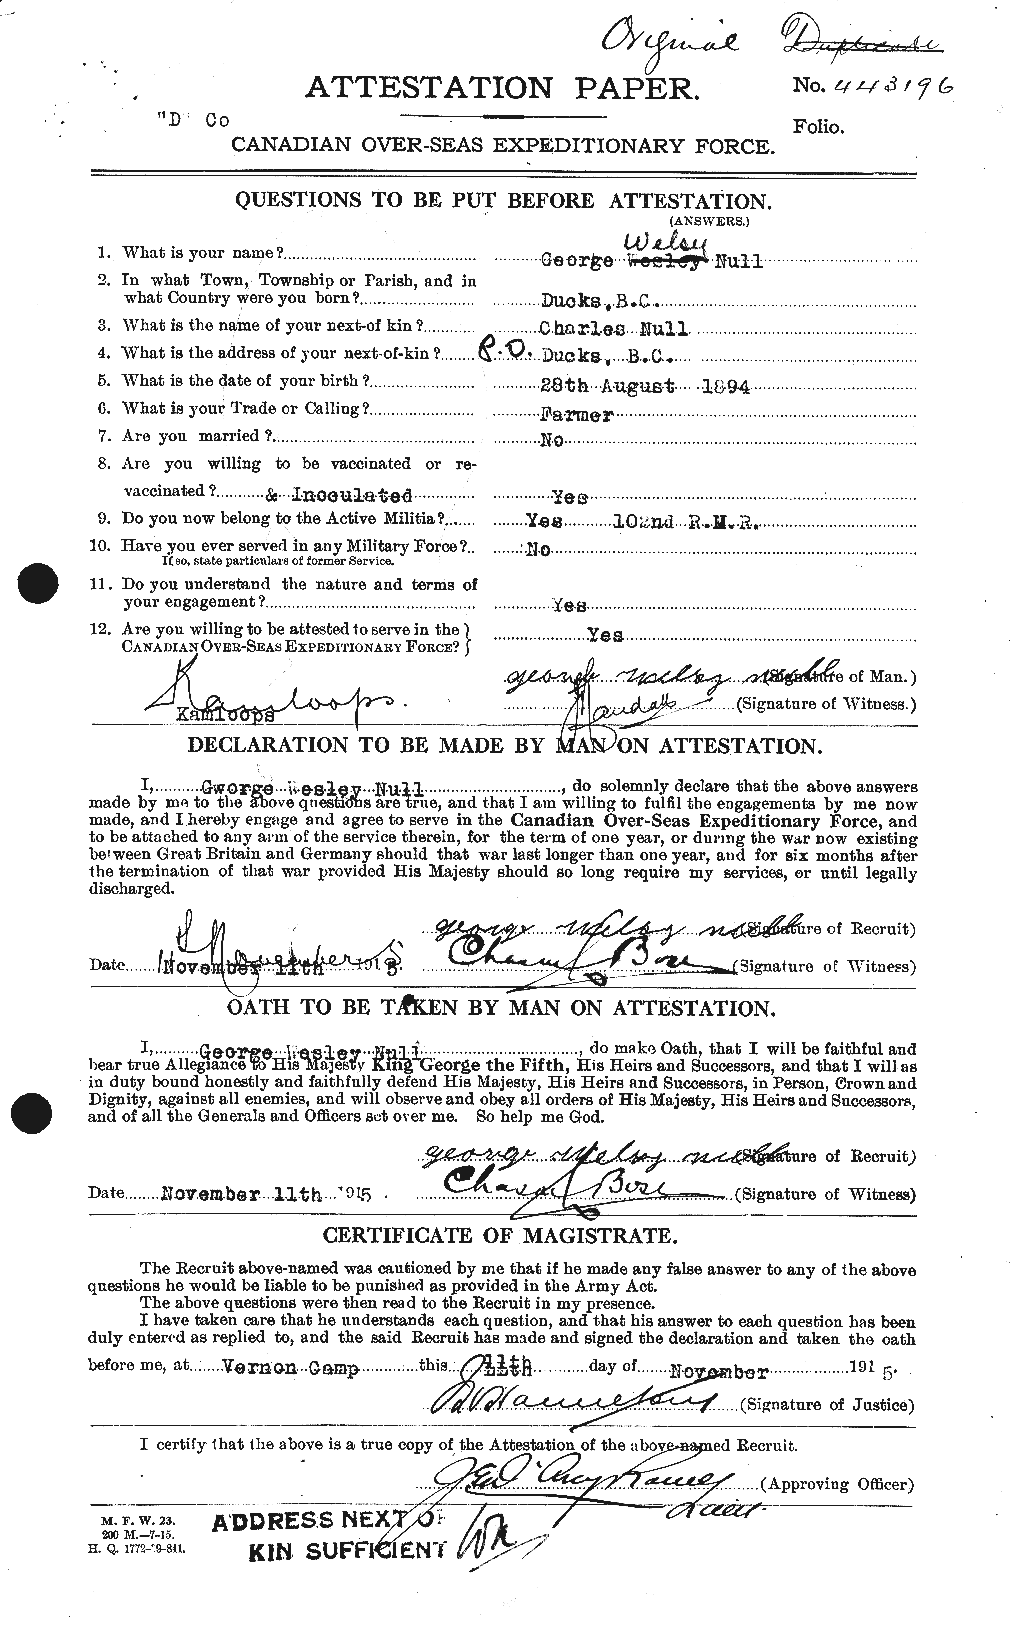 Personnel Records of the First World War - CEF 553266a